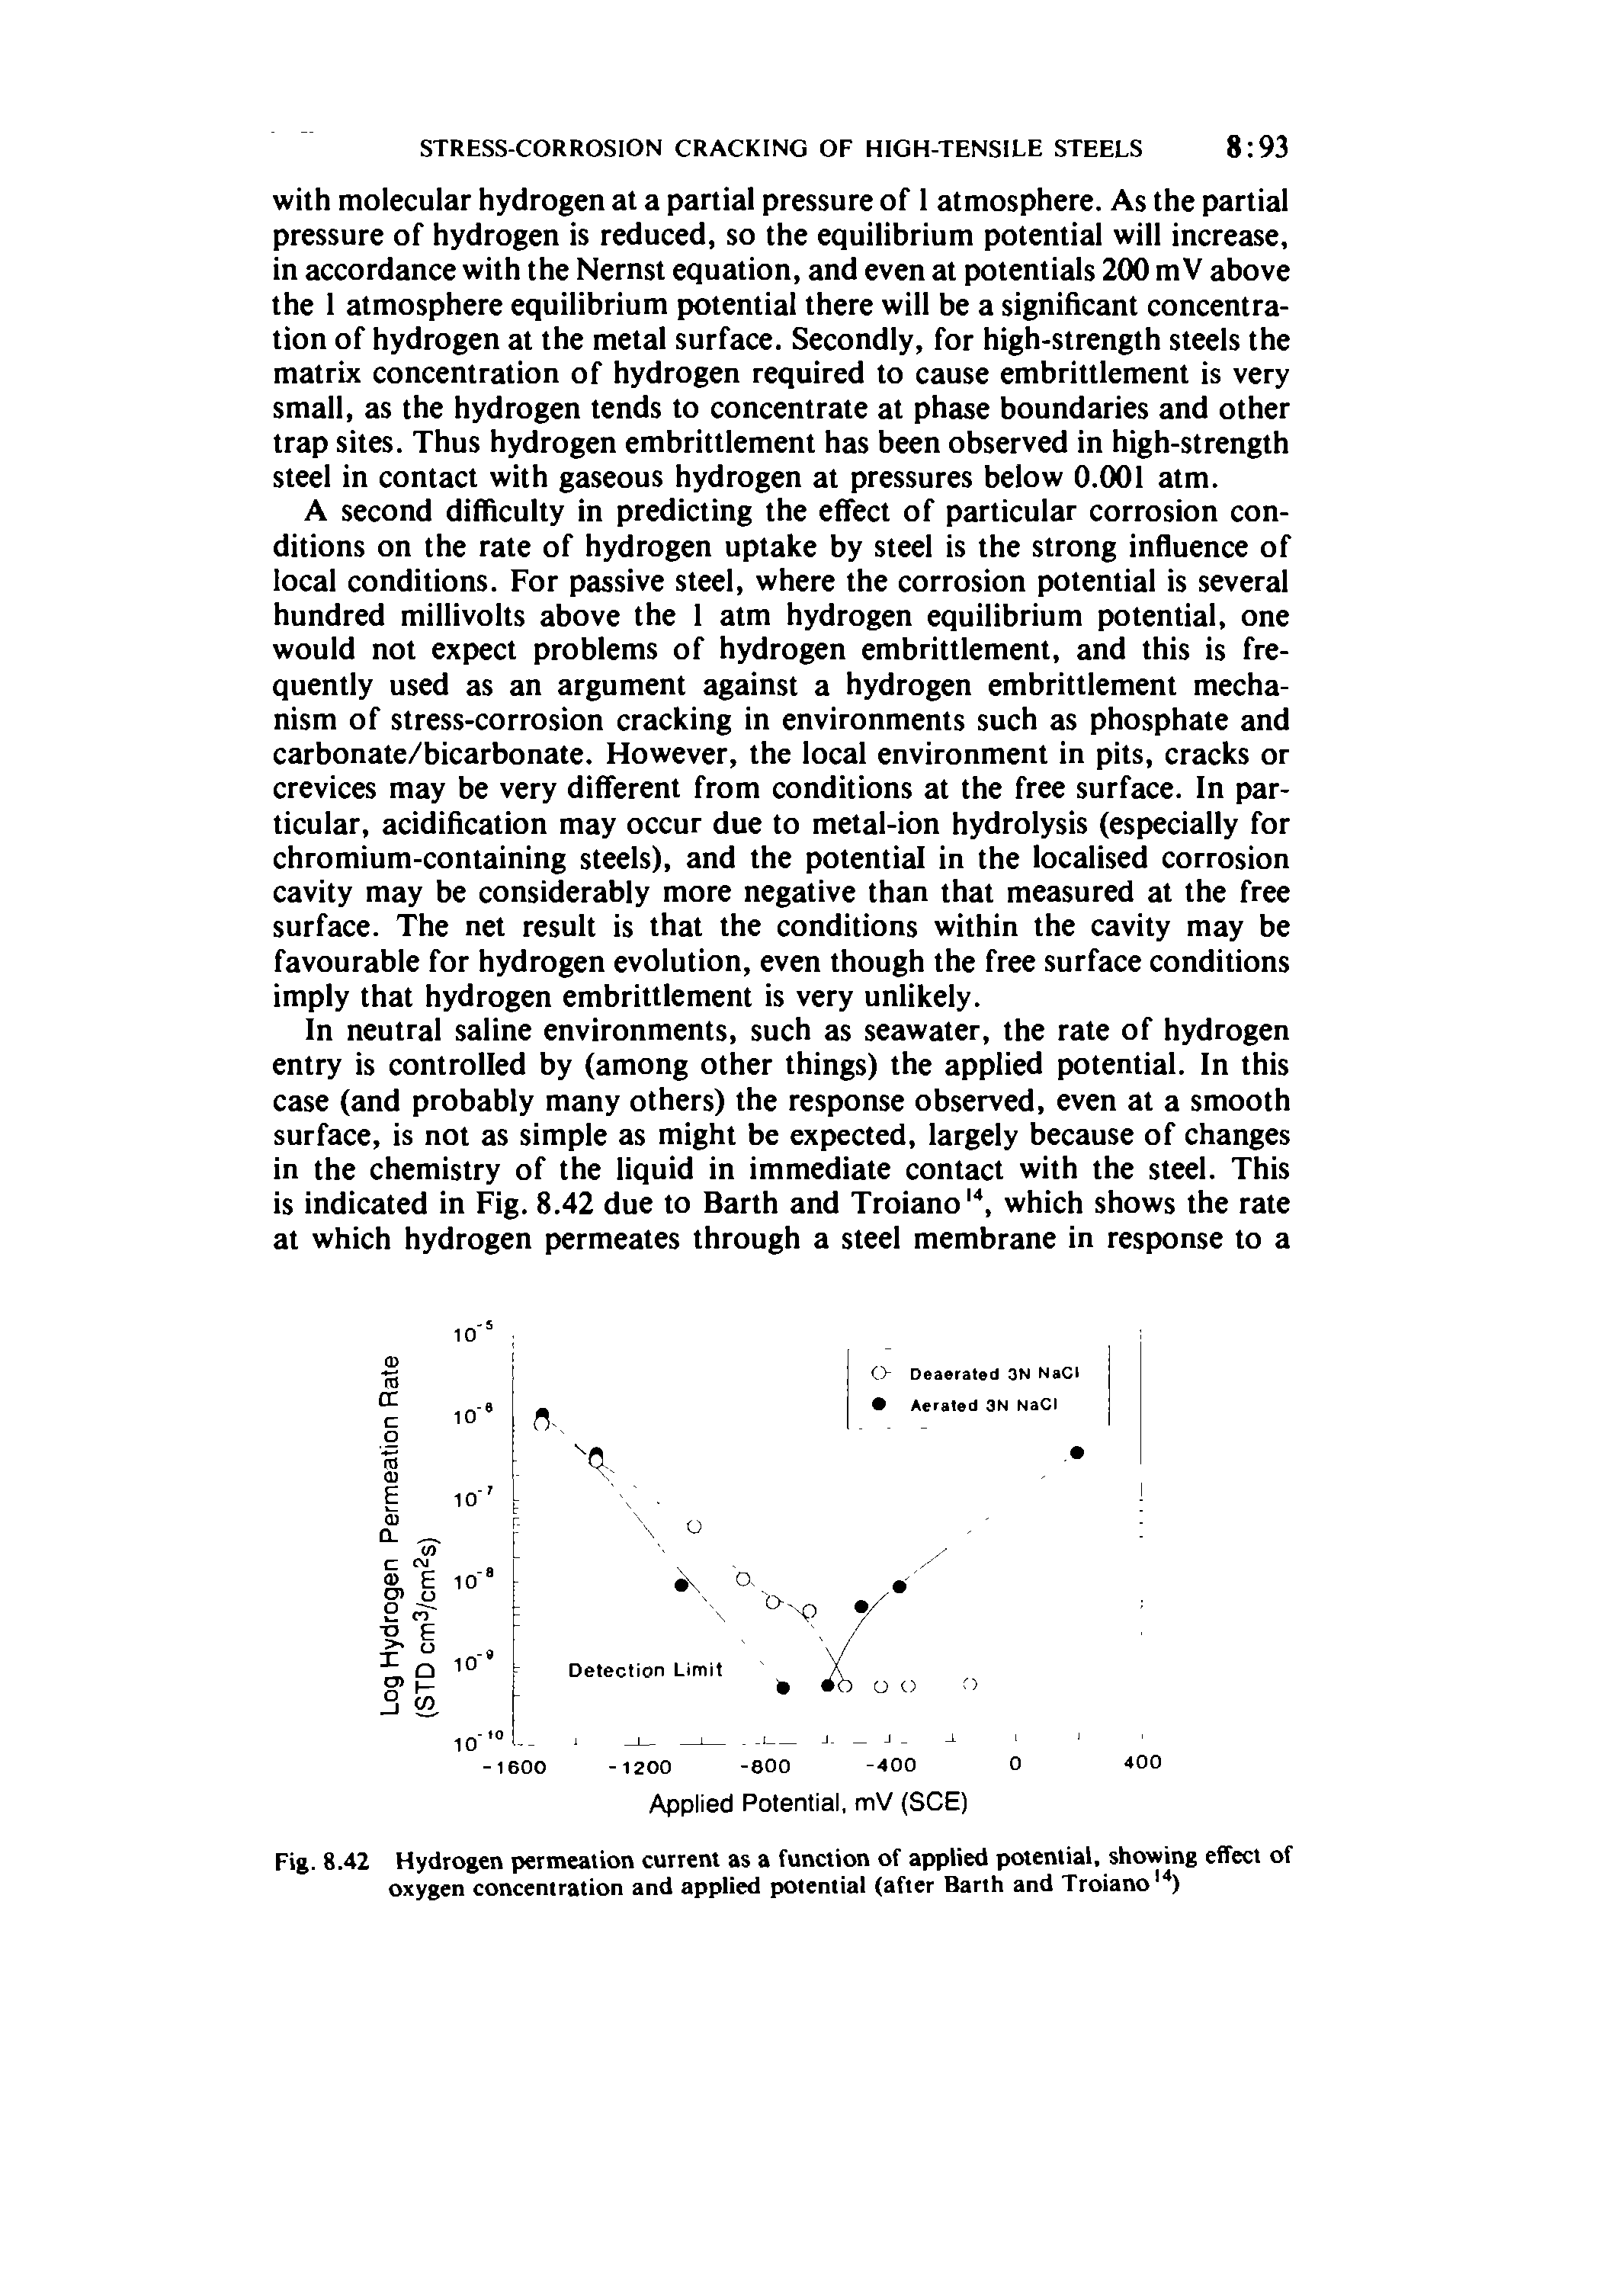 Fig. 8.42 Hydrogen permeation current as a function of applied potential, showing effect of oxygen concentration and applied potential (after Barth and Troiano )...